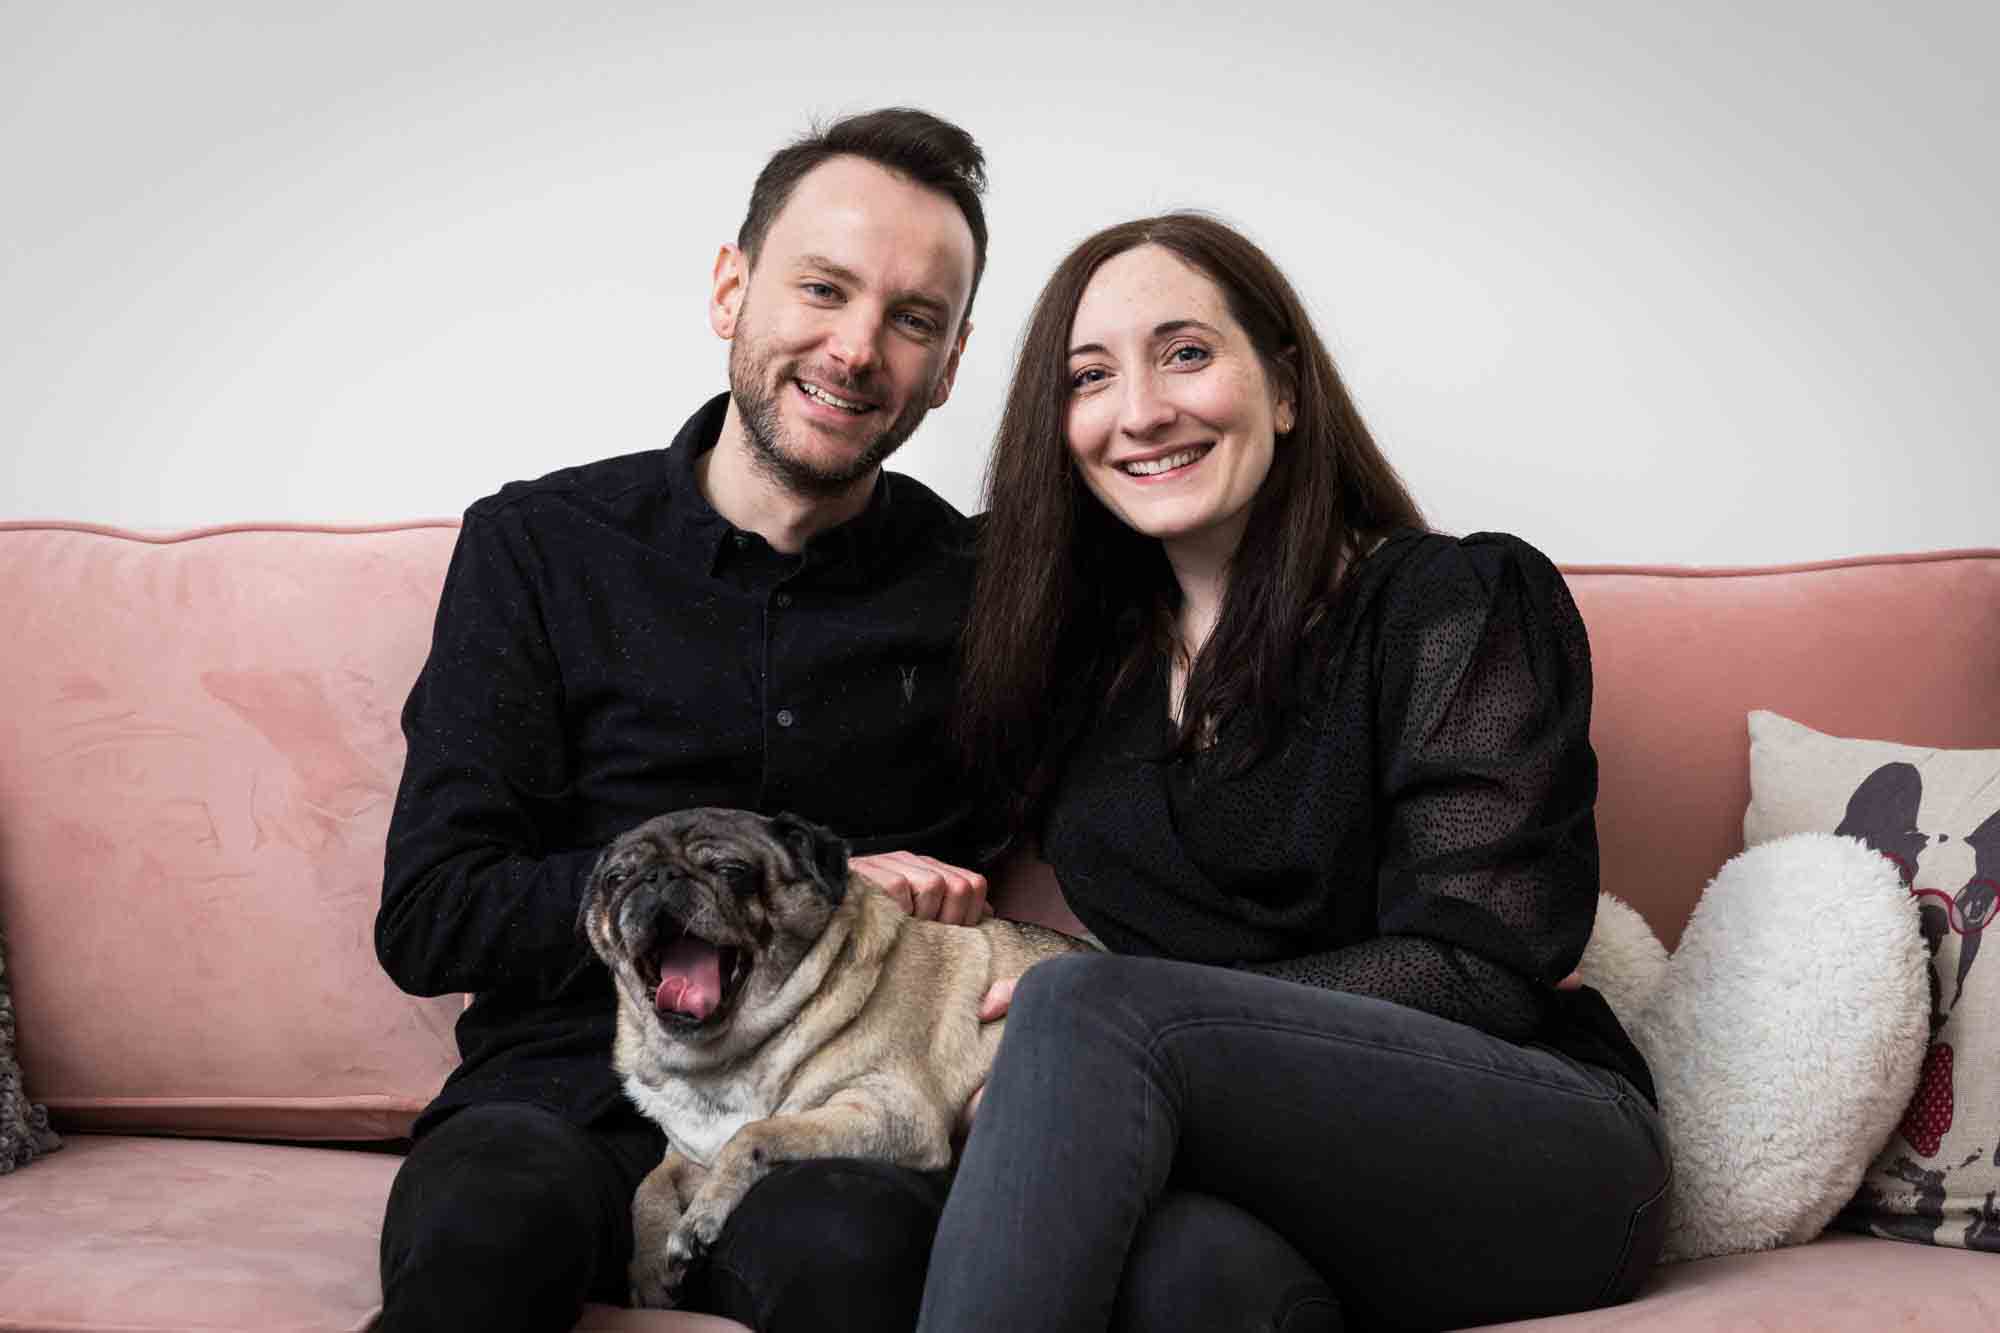 Couple with pug dog sitting on pink couch